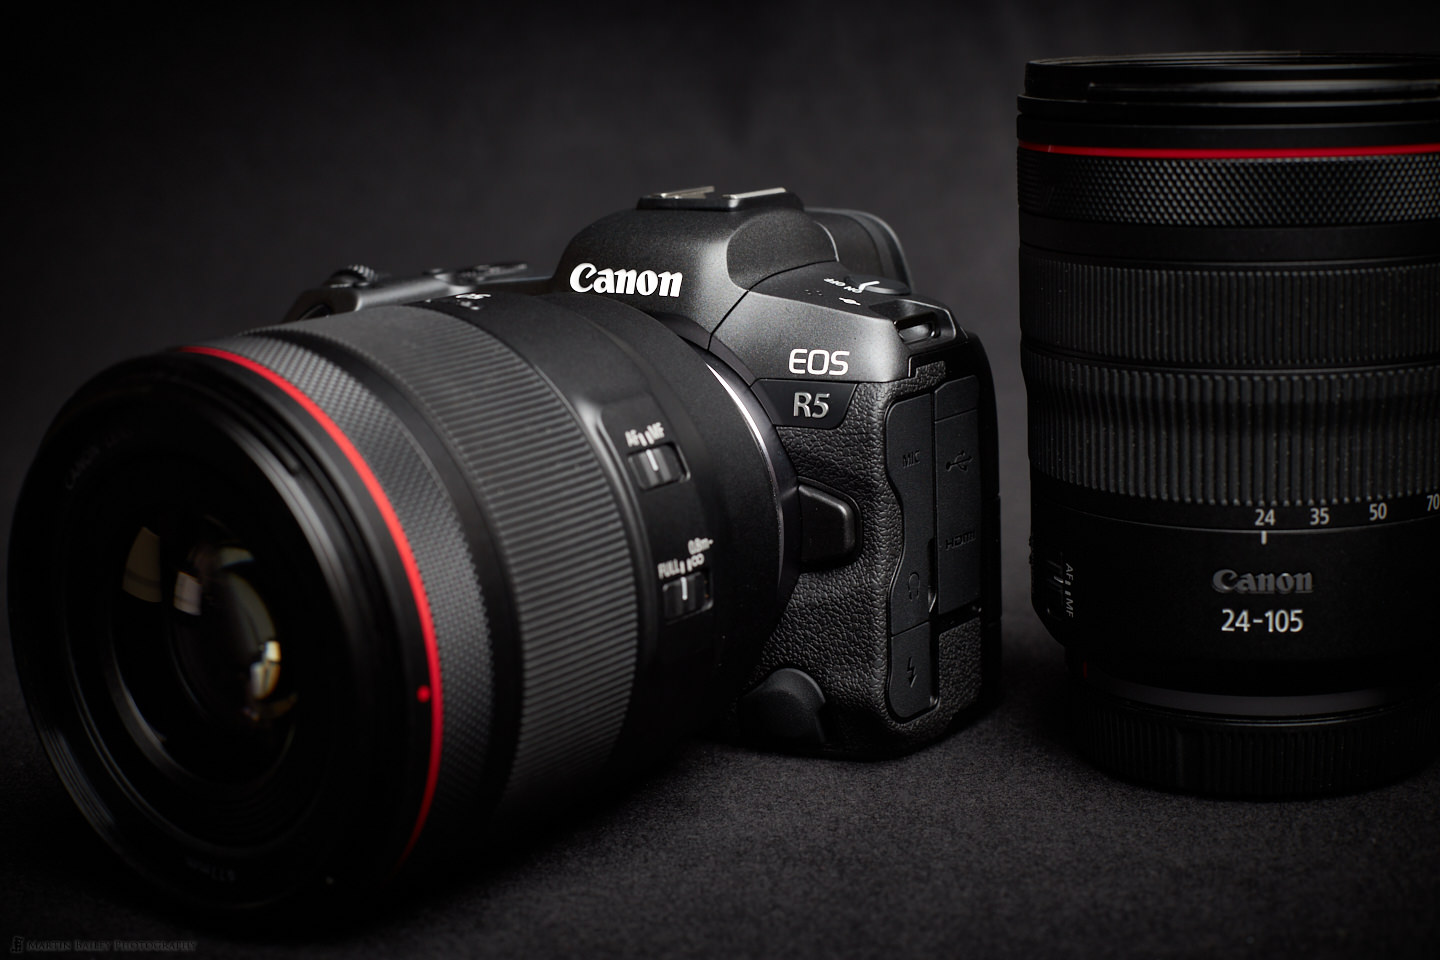 The Canon EOS R5 with 50mm and 24-105mm RF Lenses